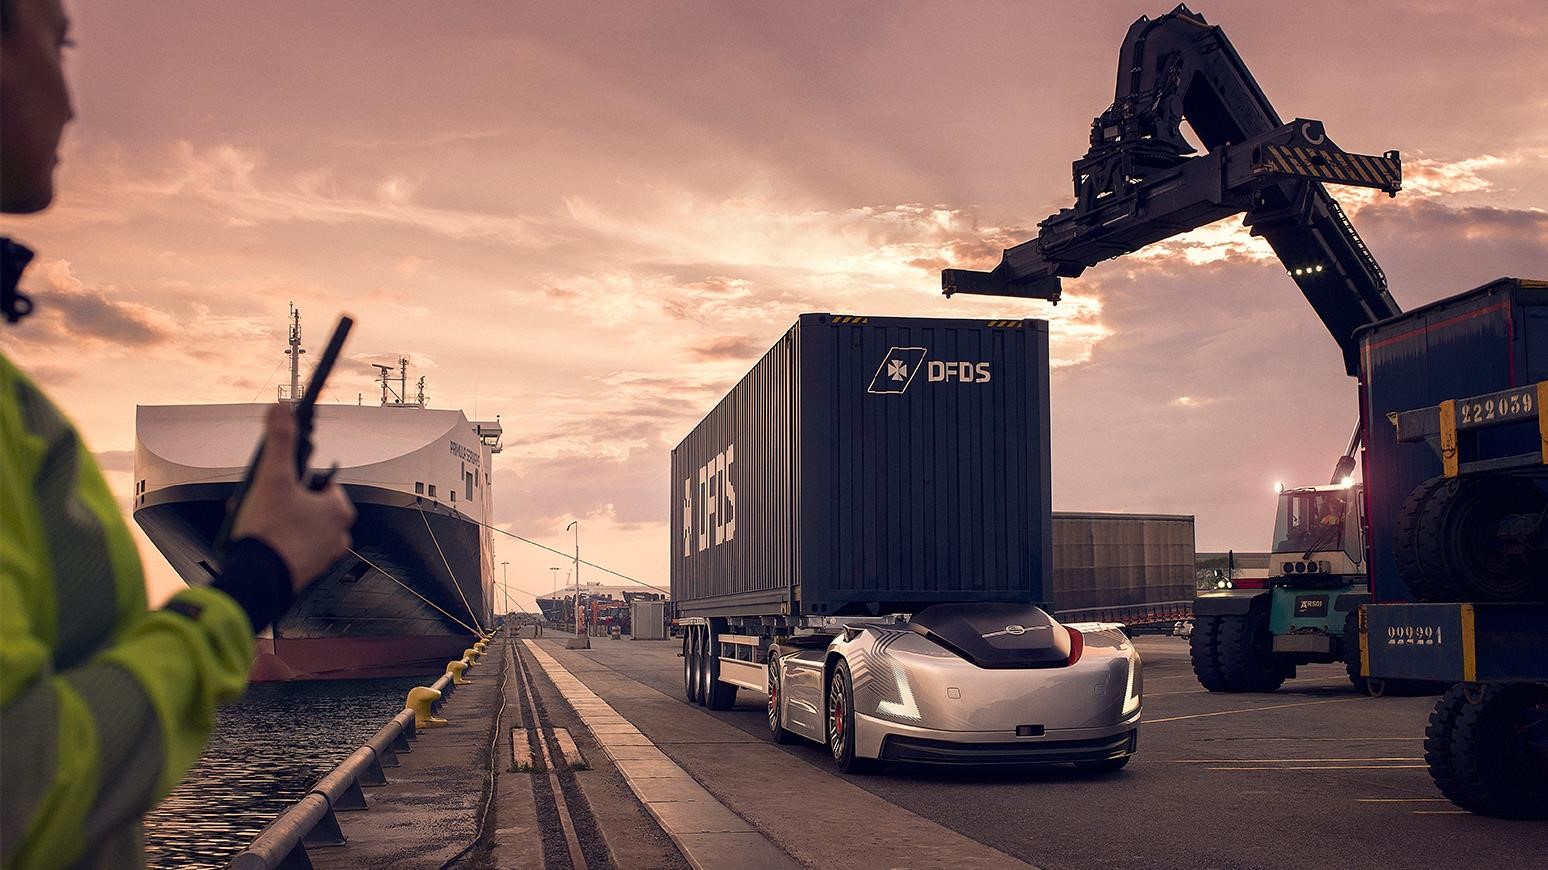 Volvo Has Given Autonomous Vehicle Vera Its First Mission In Sweden, Transporting Shipping Containers To A Port Terminal